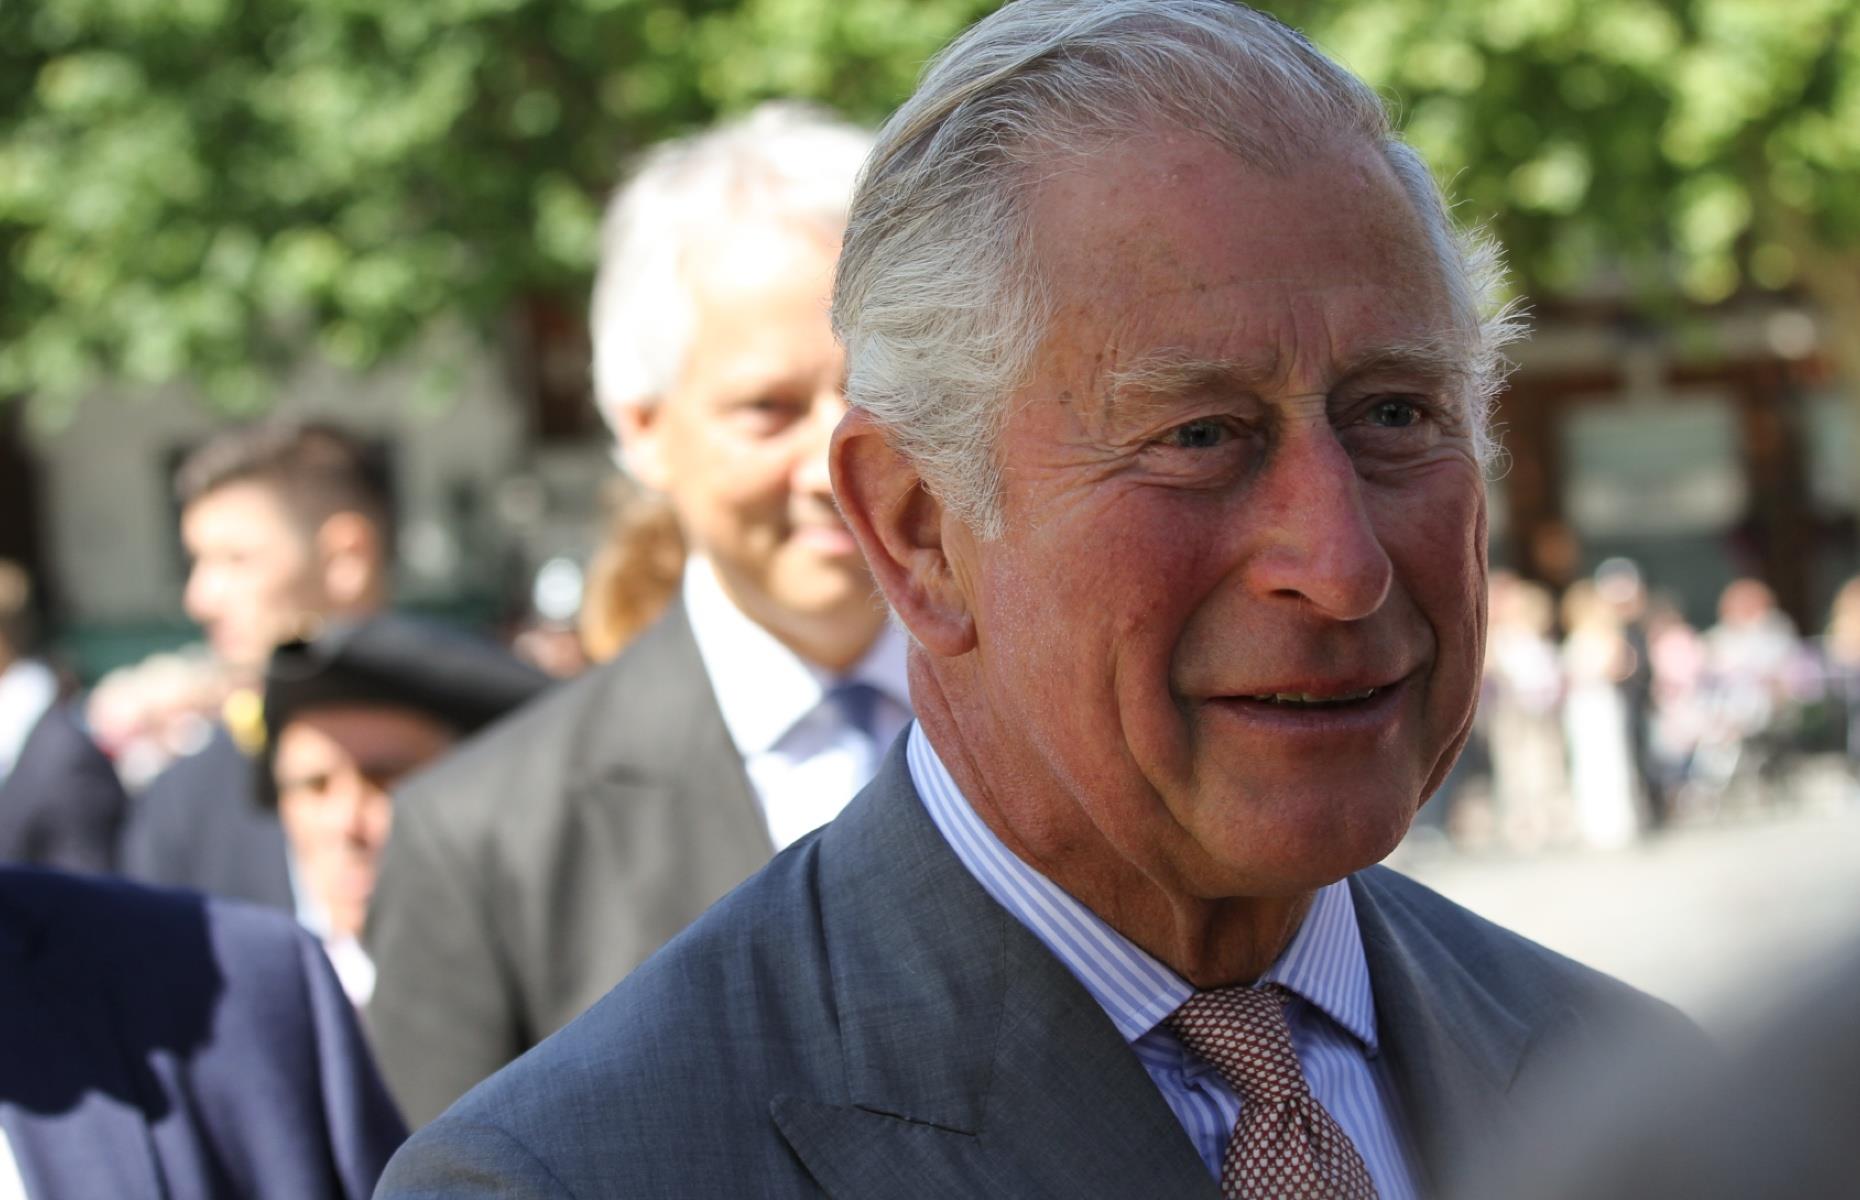 <p>In honour of his 70th birthday in 2018, Clarence House released a list of 70 facts about Prince Charles (as he was back then). One lesser-known nugget of information that surprised the public was that he doesn’t eat lunch. According to former royal correspondent for<em> The Daily Telegraph,</em> Gordon Rayner, Charles said that lunch interferes with his busy work schedule, and he considers being able to eat a midday meal a luxury.</p>